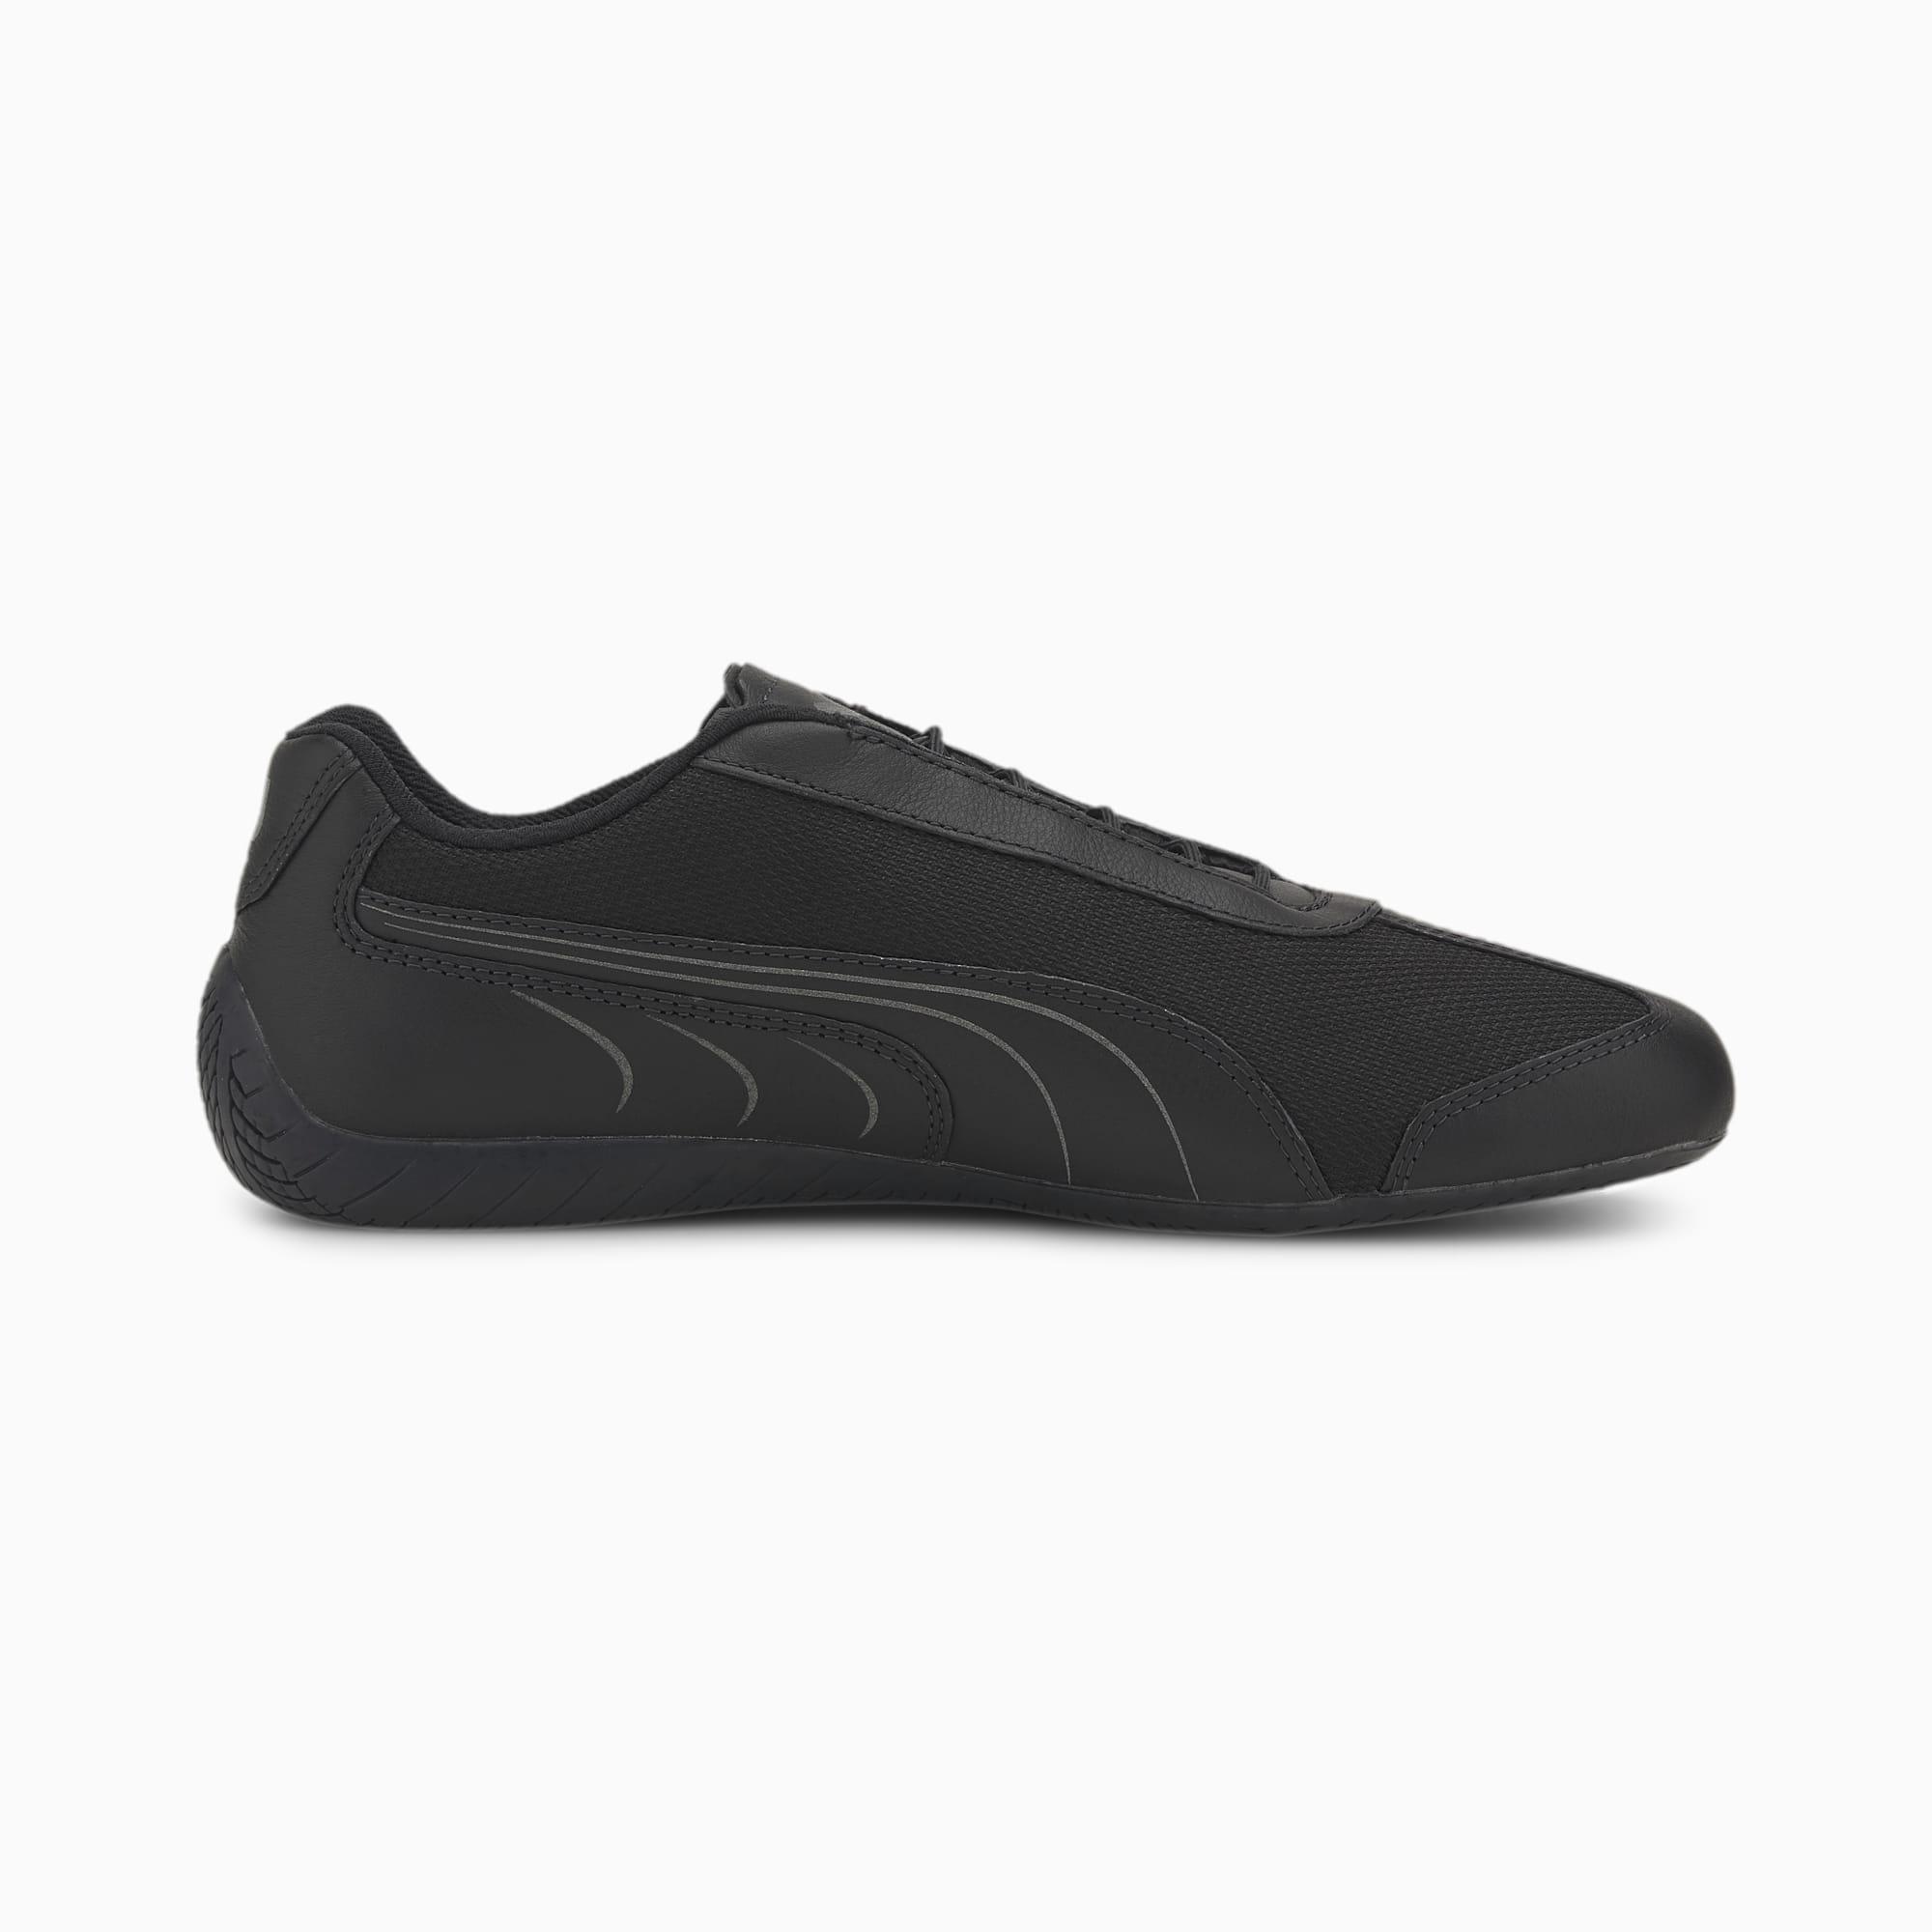 puma speed cat driving shoes